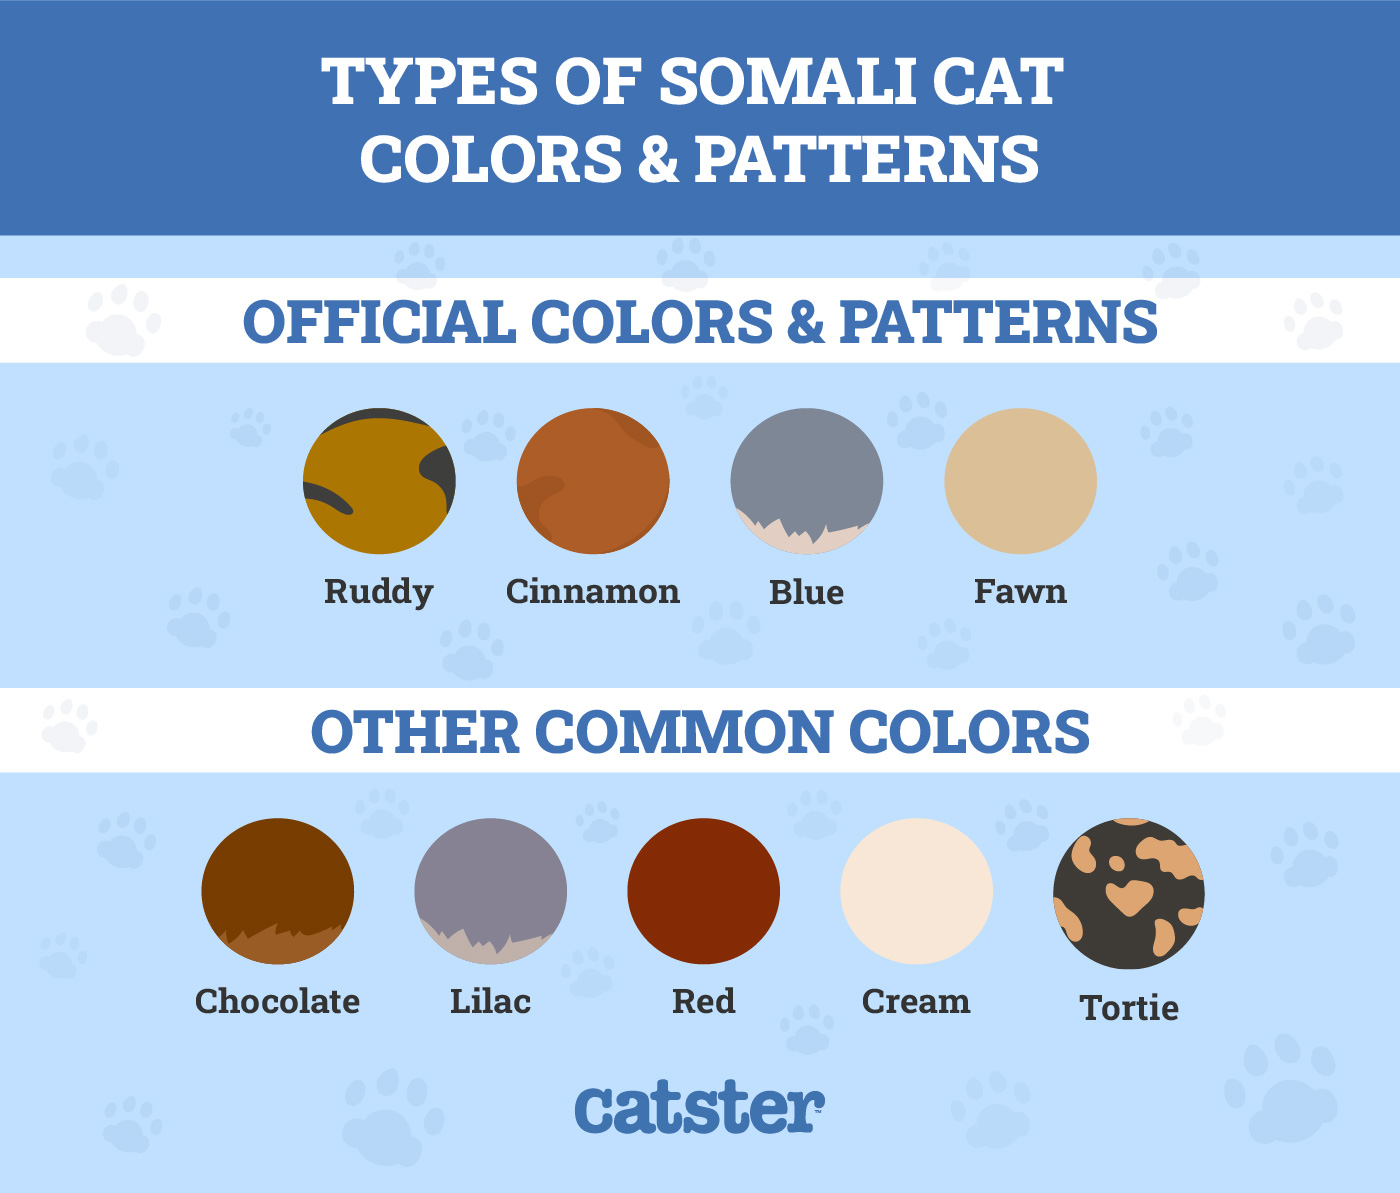 Types of Somali Cat Colors & Patterns